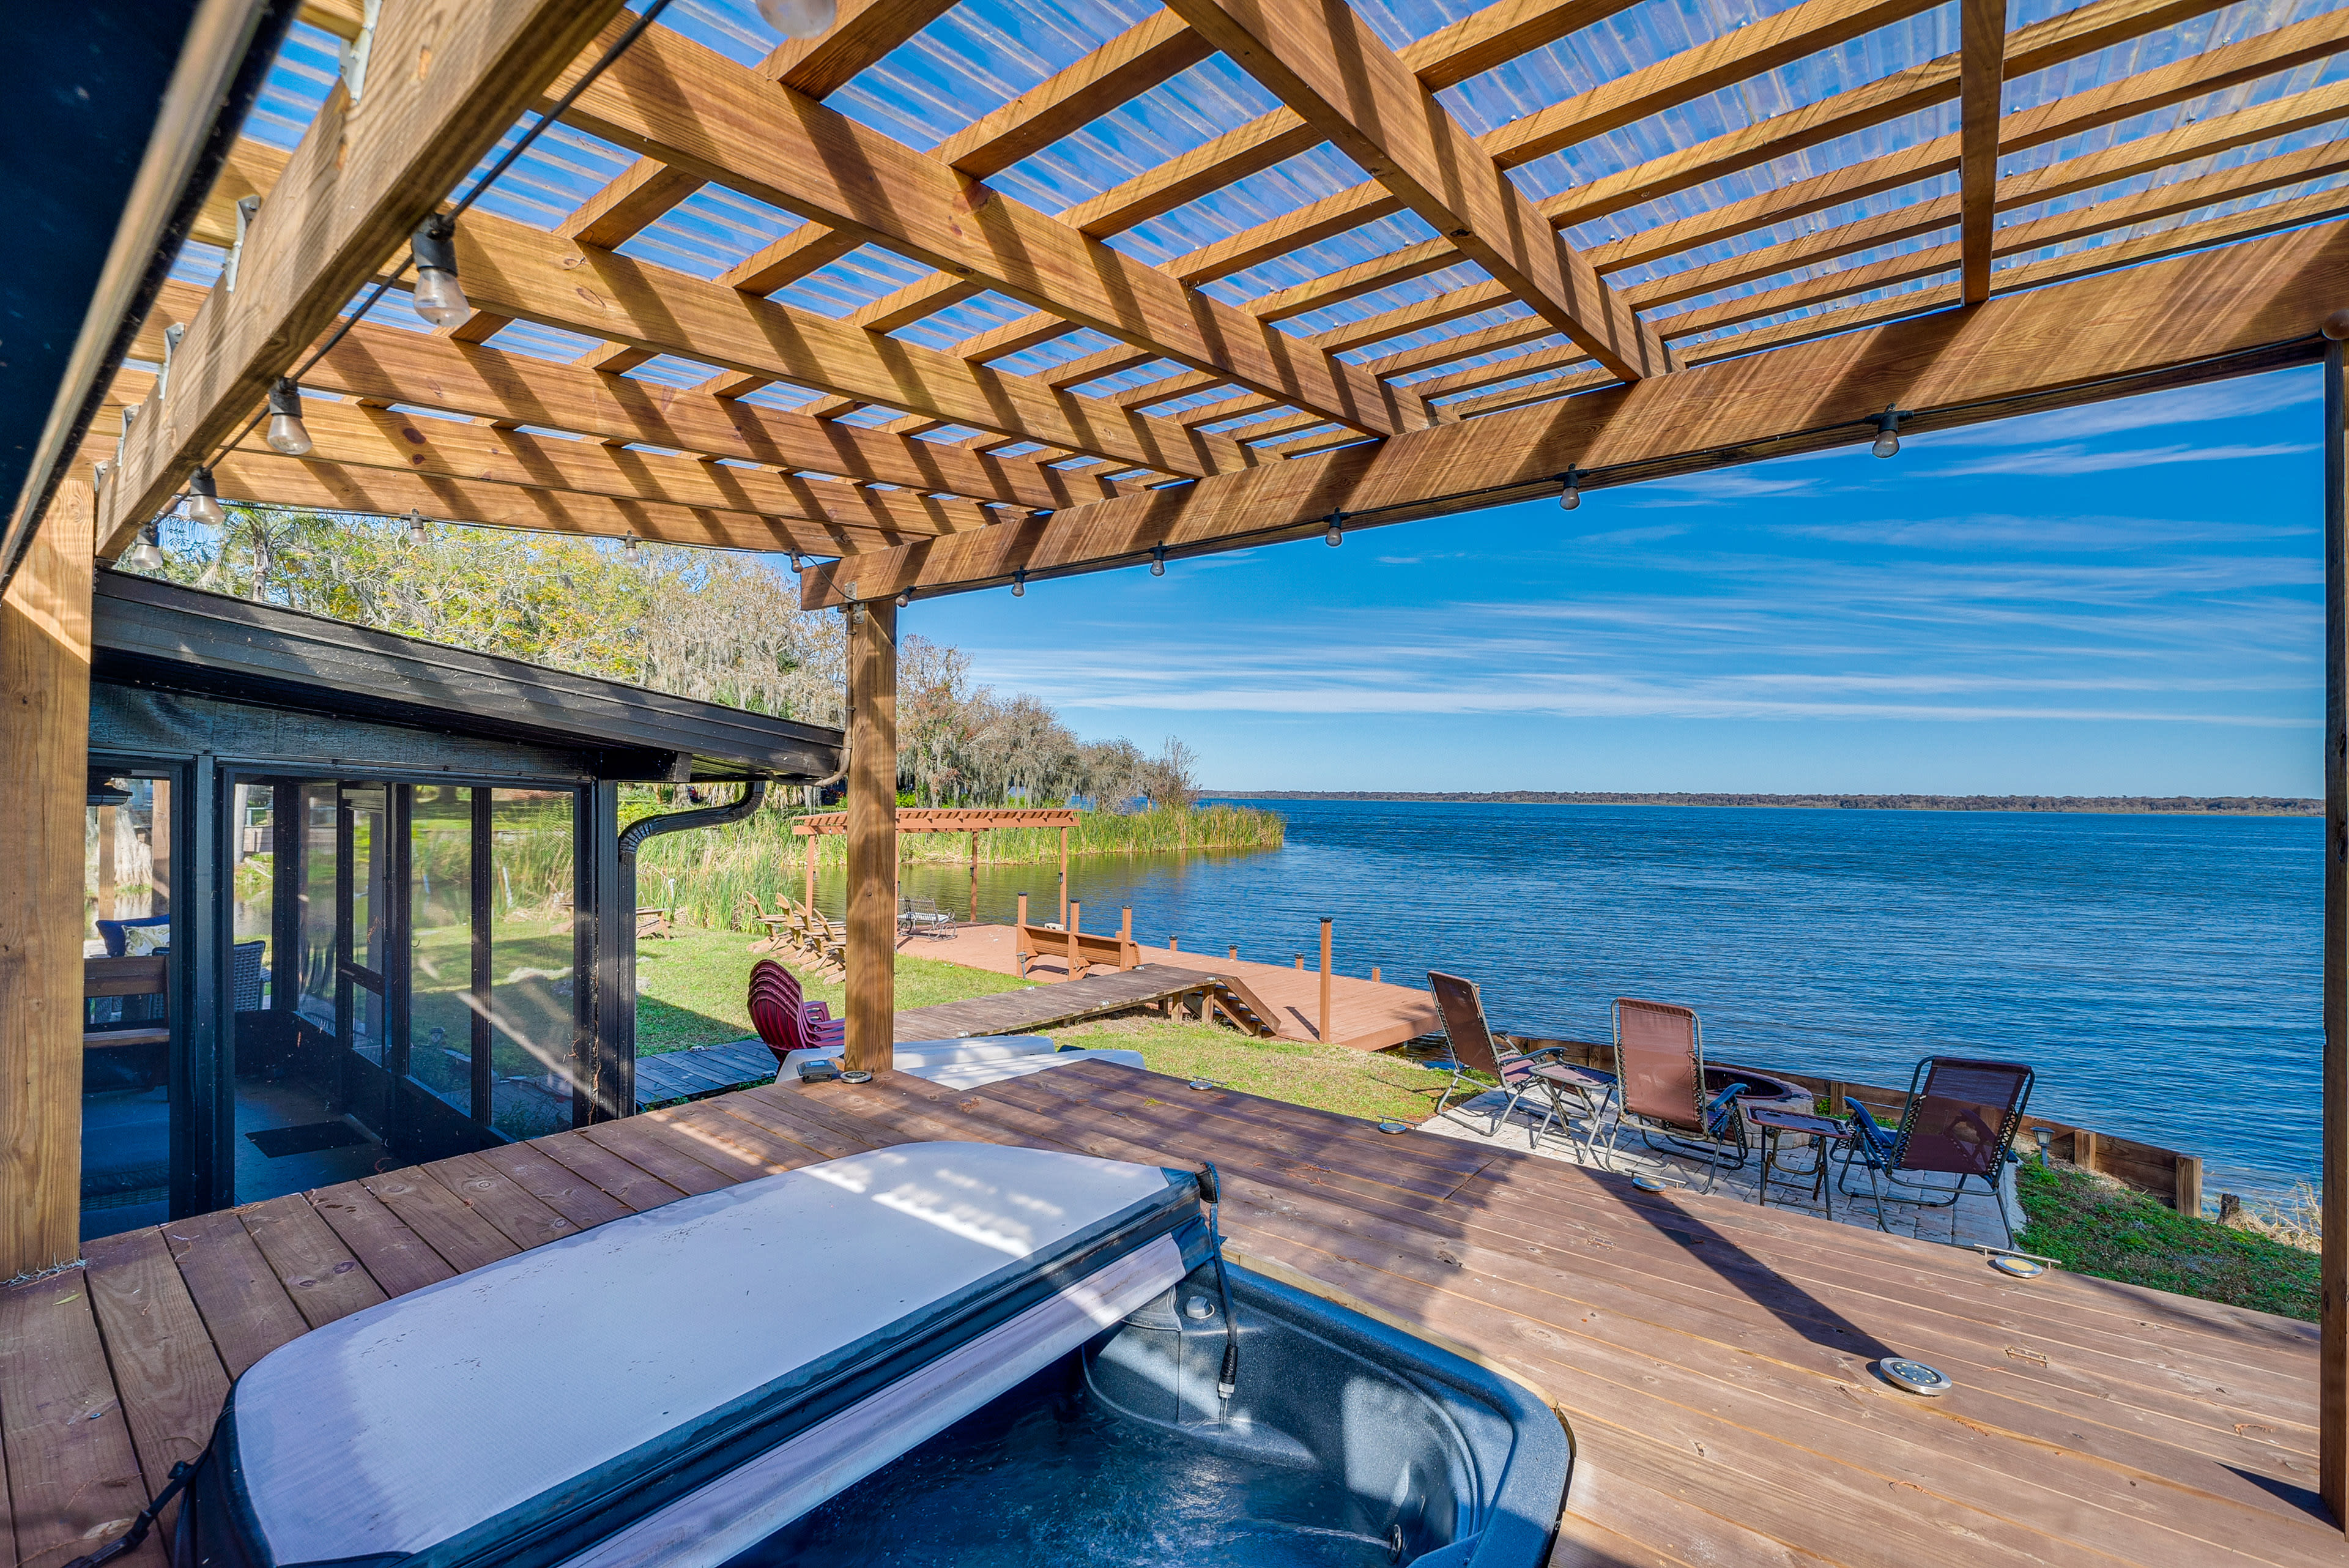 Hot Tub | Fire Pit | Private Dock | Lakefront